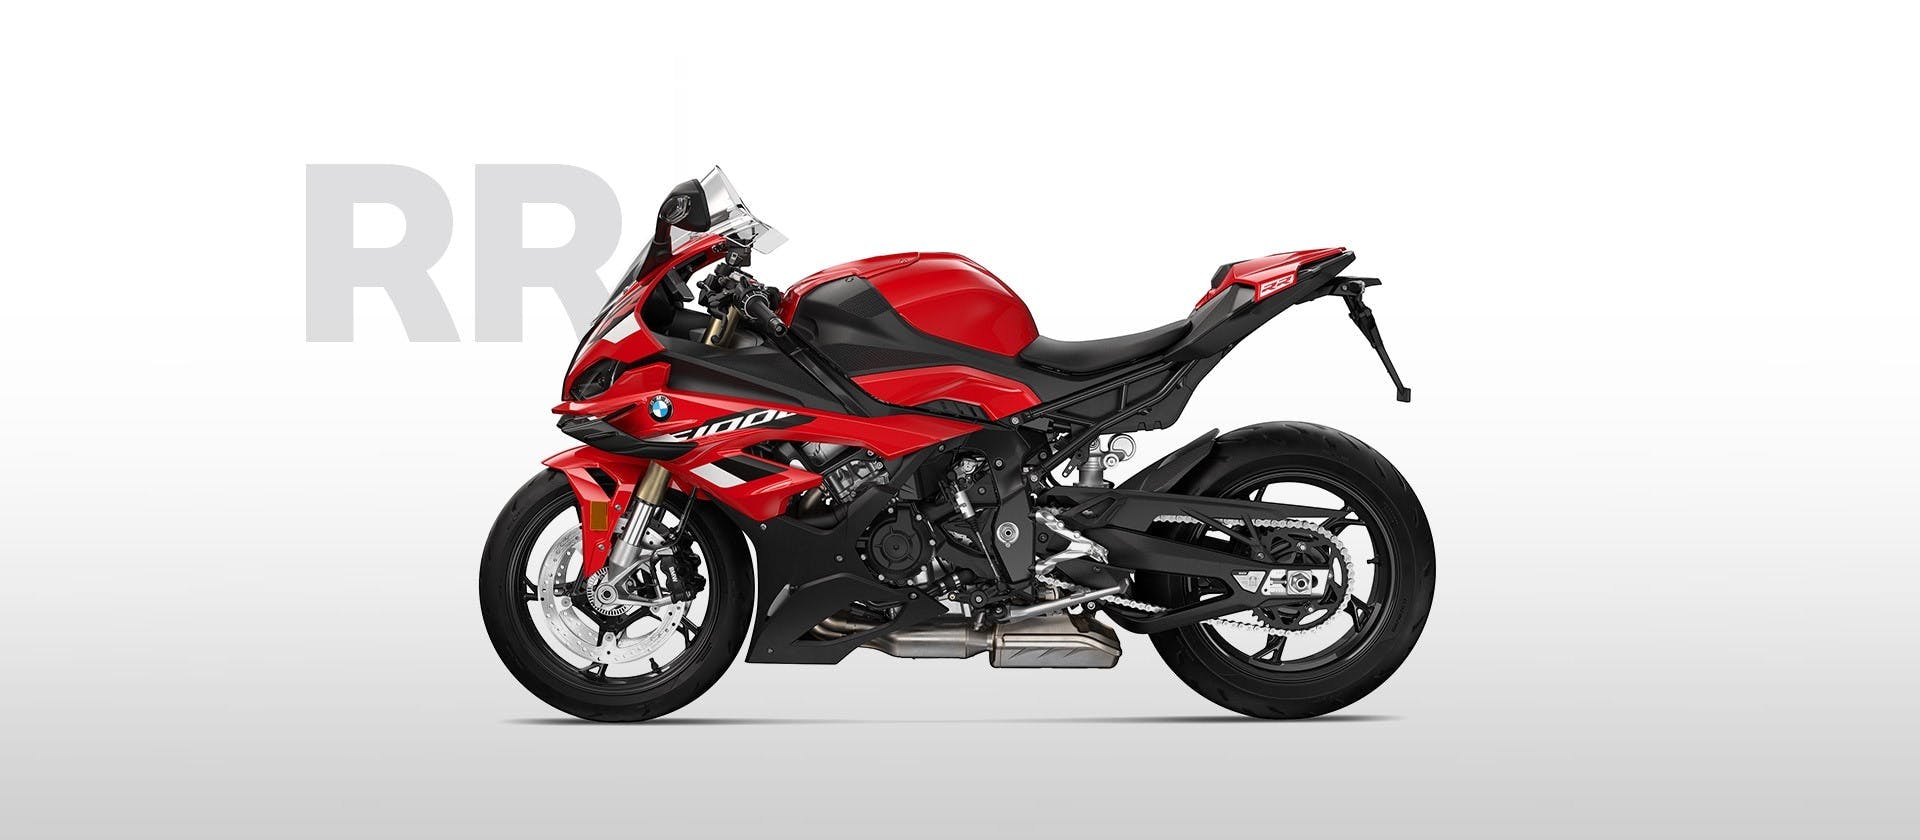 BMW S 1000 RR in racing red colour